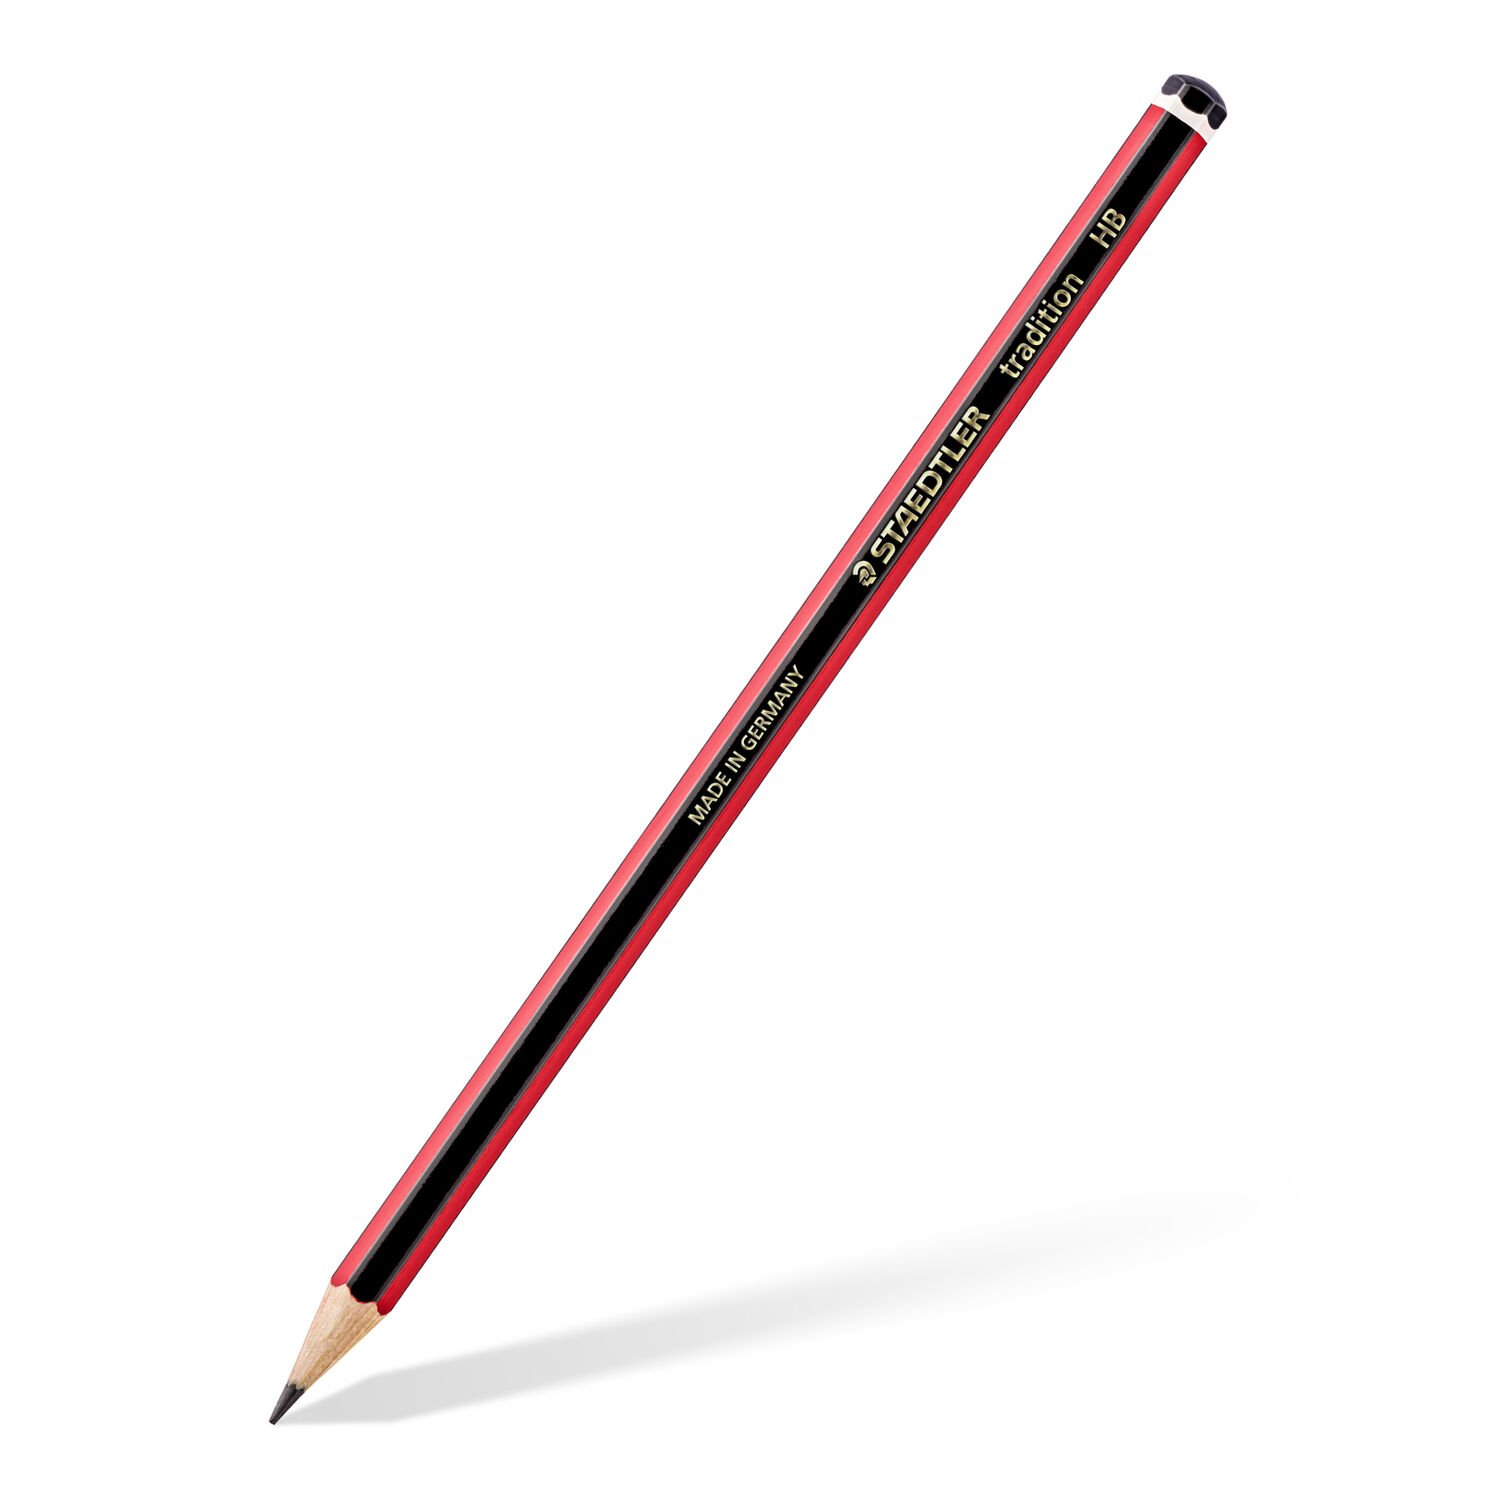 STAEDTLER 110-2H Tradition Graphite Pencil for Drawing & Sketching - 2H  (Box of 12), Black